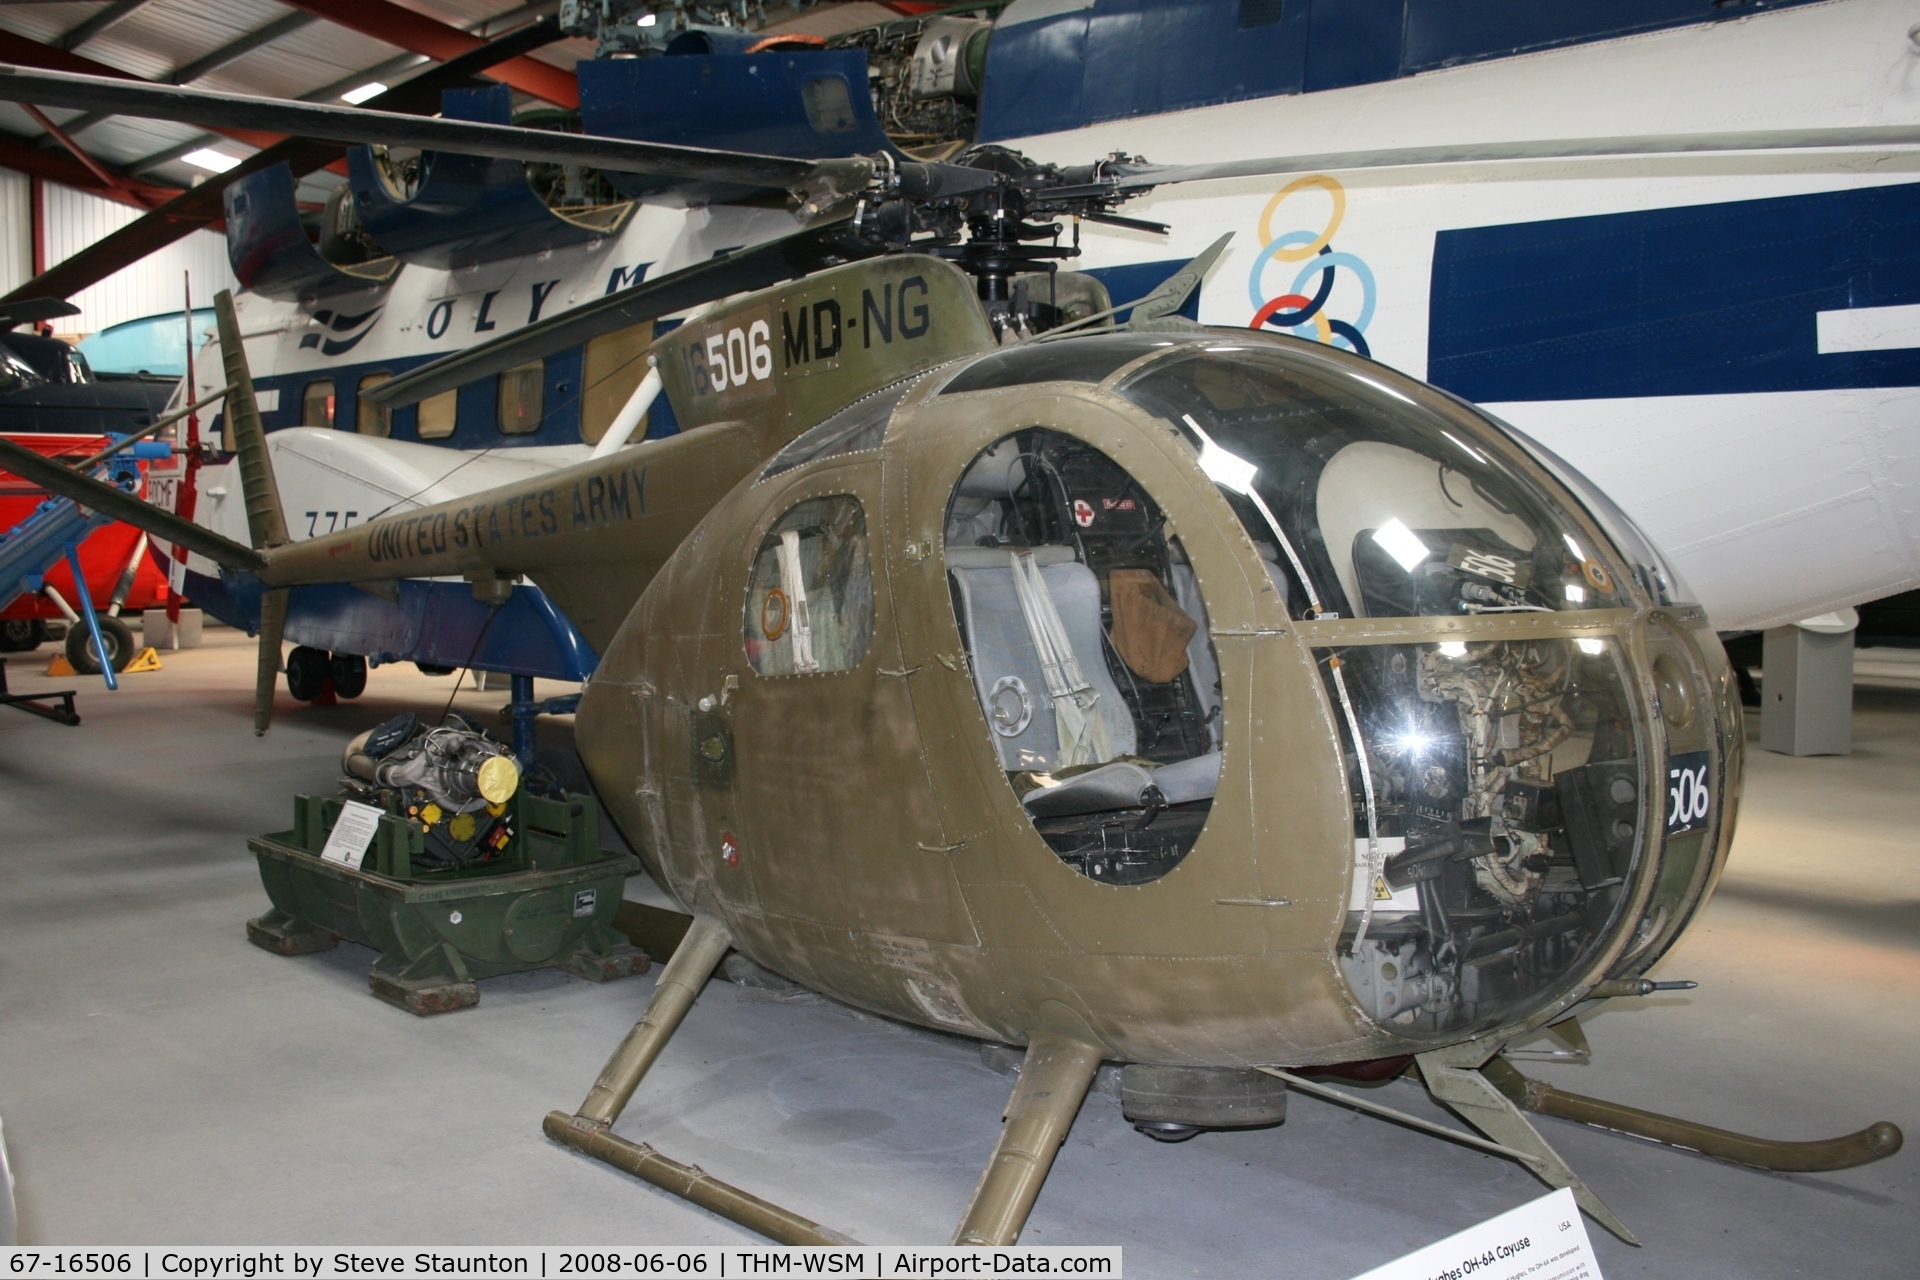 67-16506, 1963 Hughes OH-6A Cayuse C/N 0891, Taken at the Helicopter Museum (http://www.helicoptermuseum.co.uk/)